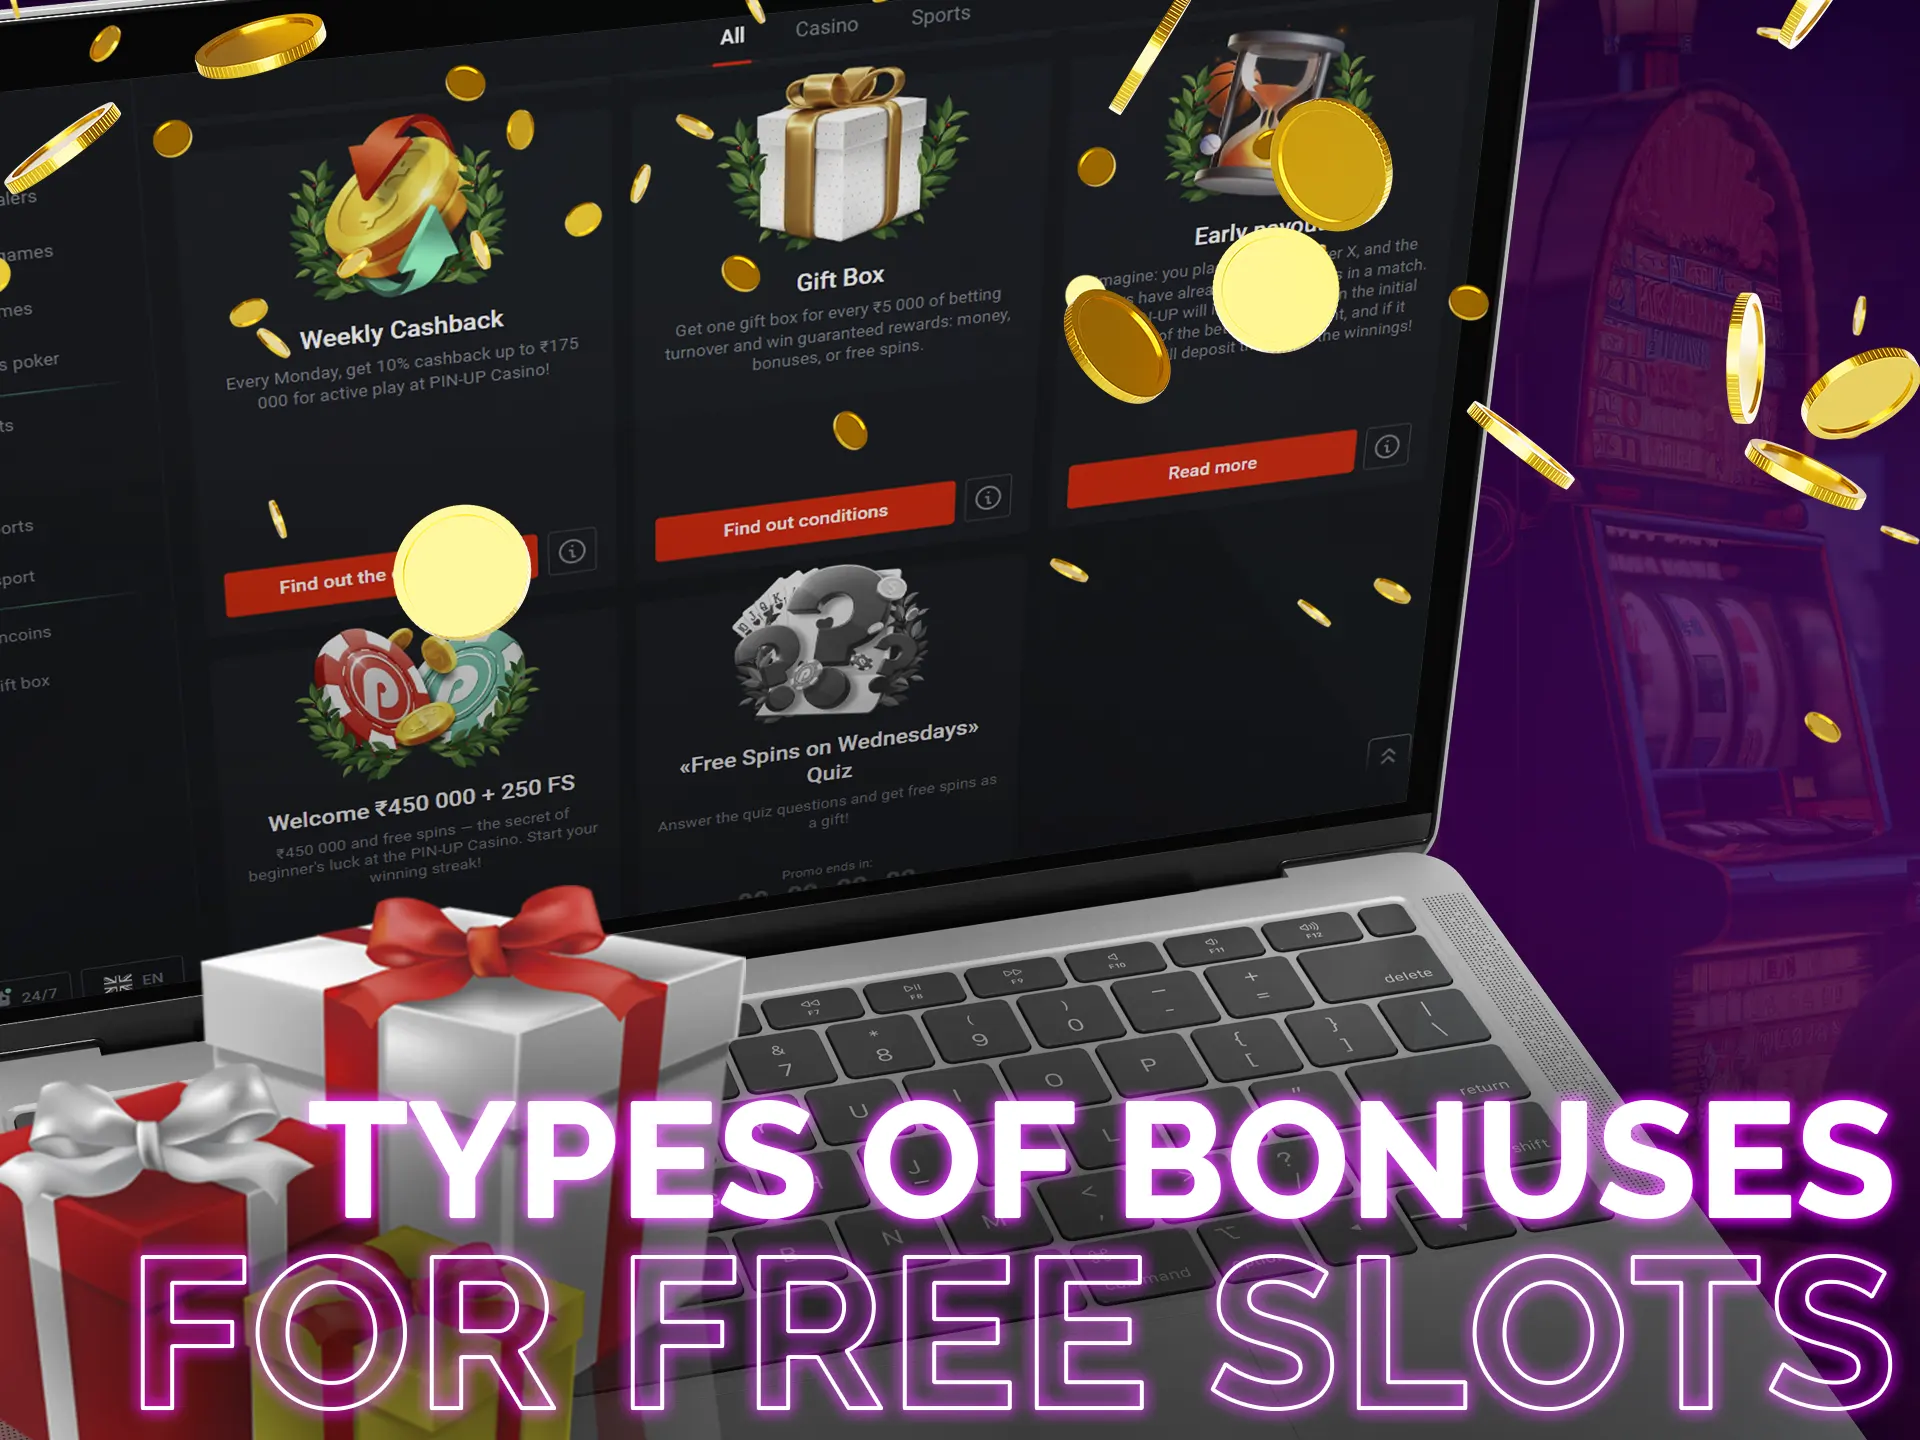 Many online casinos provide their users with additional rewards when they provide certain performance indicators when playing slots.